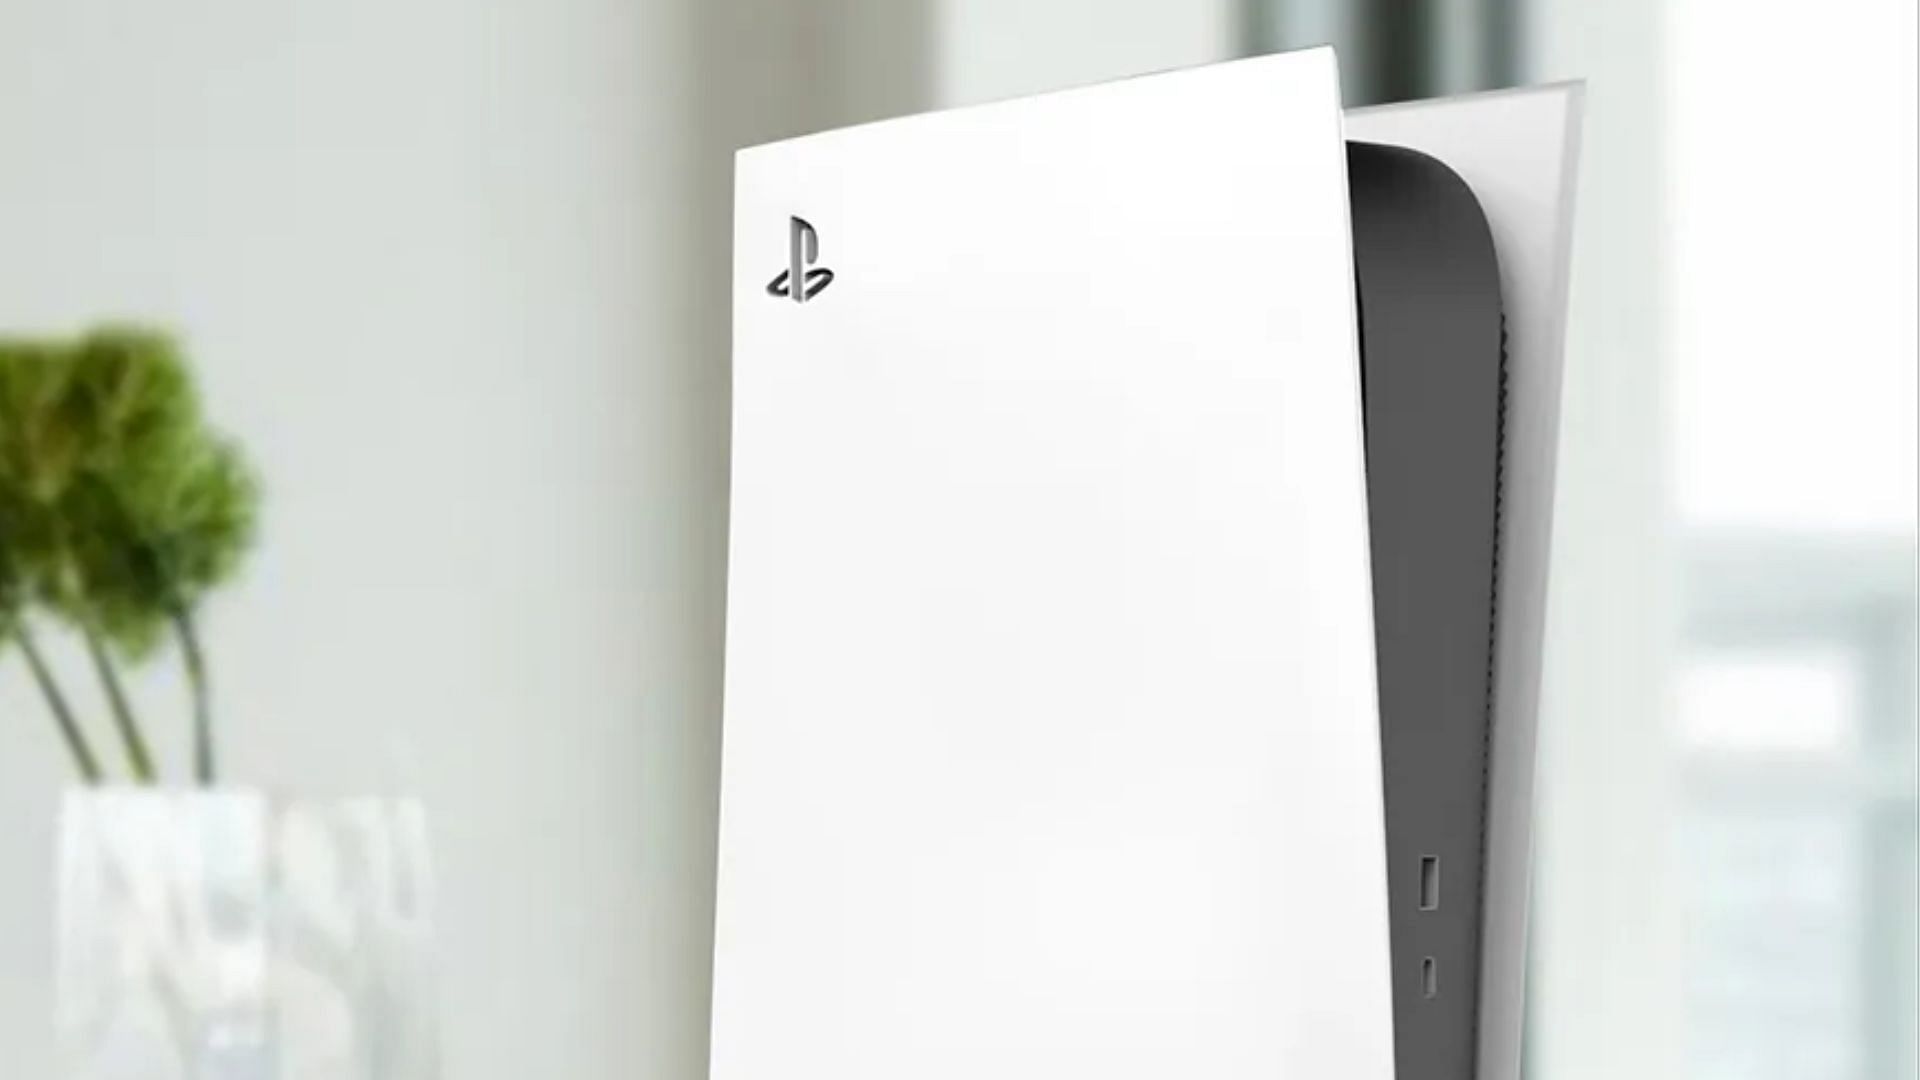 PS5 Slim Digital Edition is Now Available - IGN